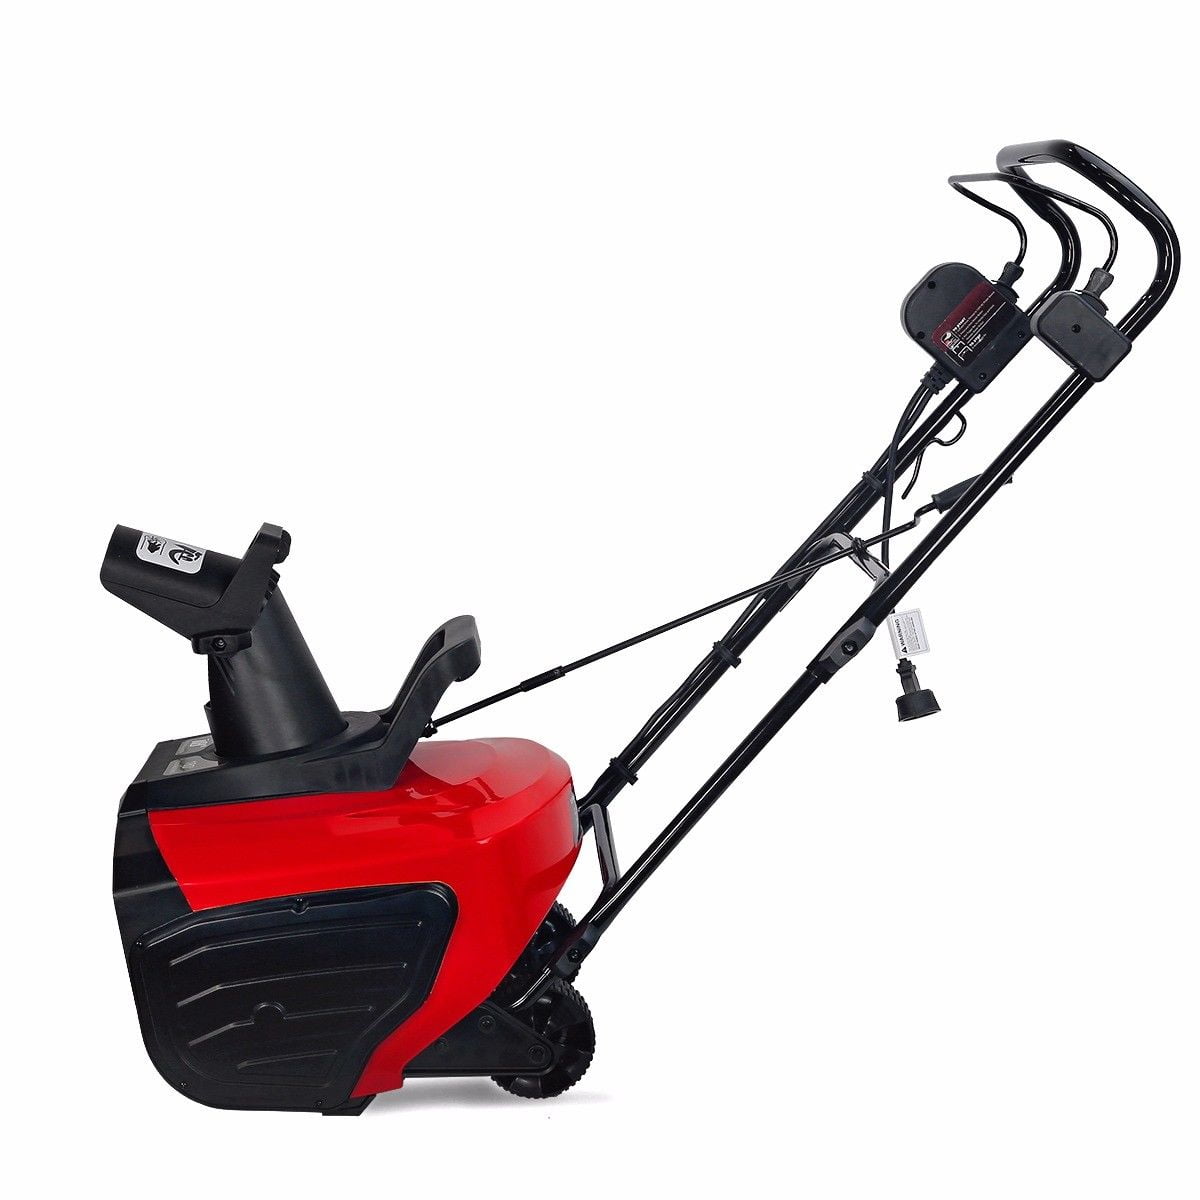 XtremepowerUS 1600W Ultra Electric Snow Blaster 18-inch Electric Snow  Thrower Adjustable Directional Driveway Walkway